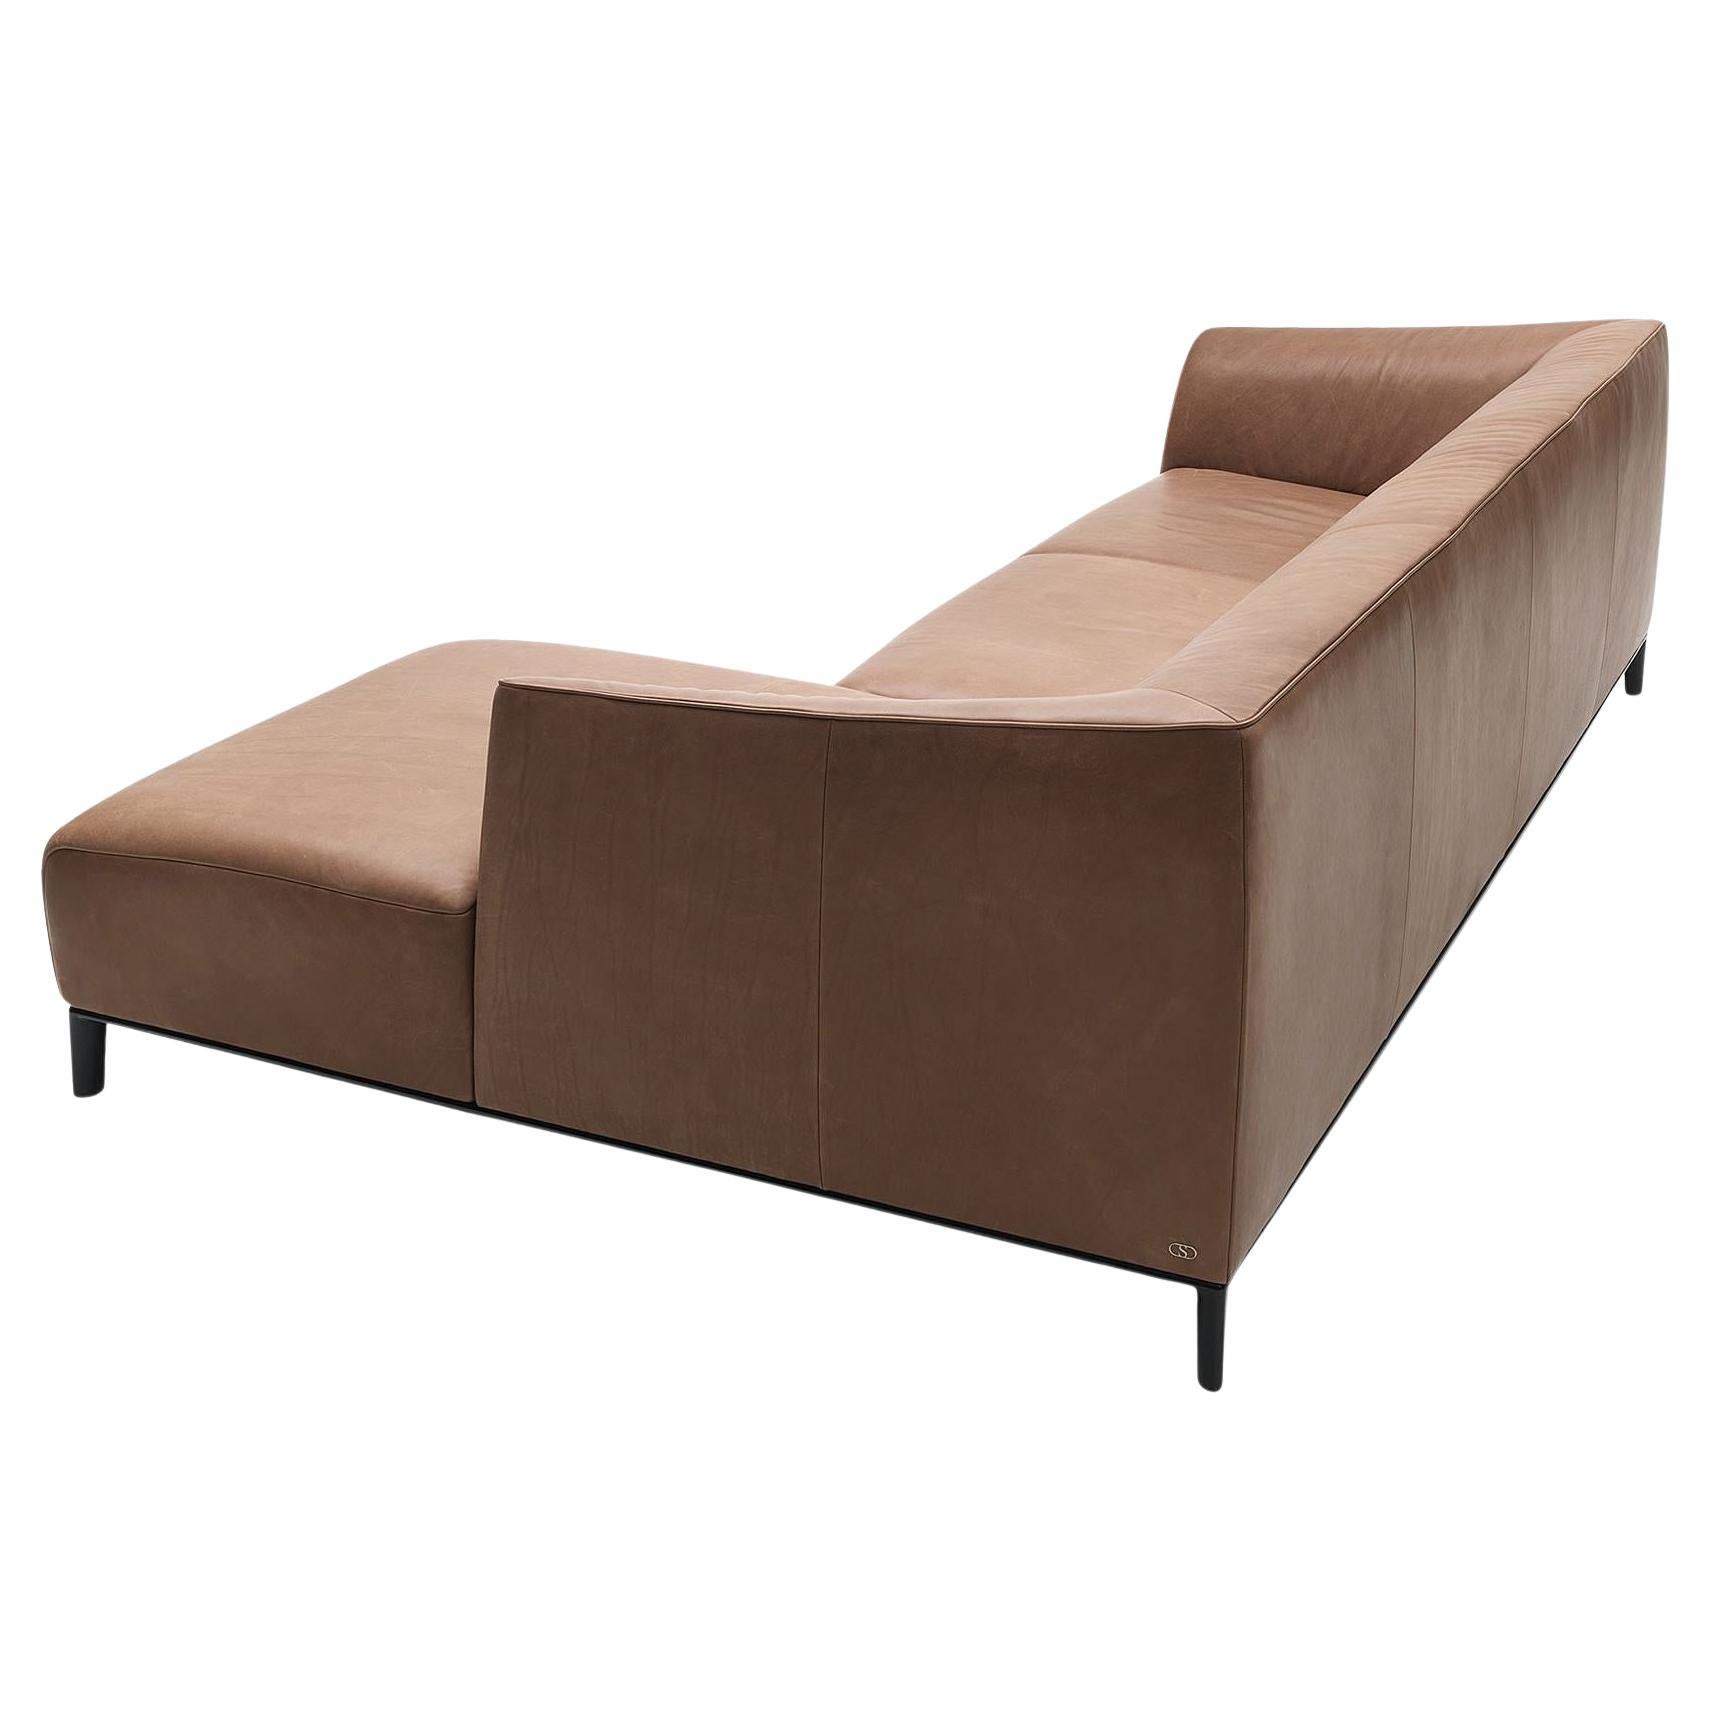 De Sede DS-276/260 Modular Sofa in Natural Wot Upholstery by Christian Werner For Sale